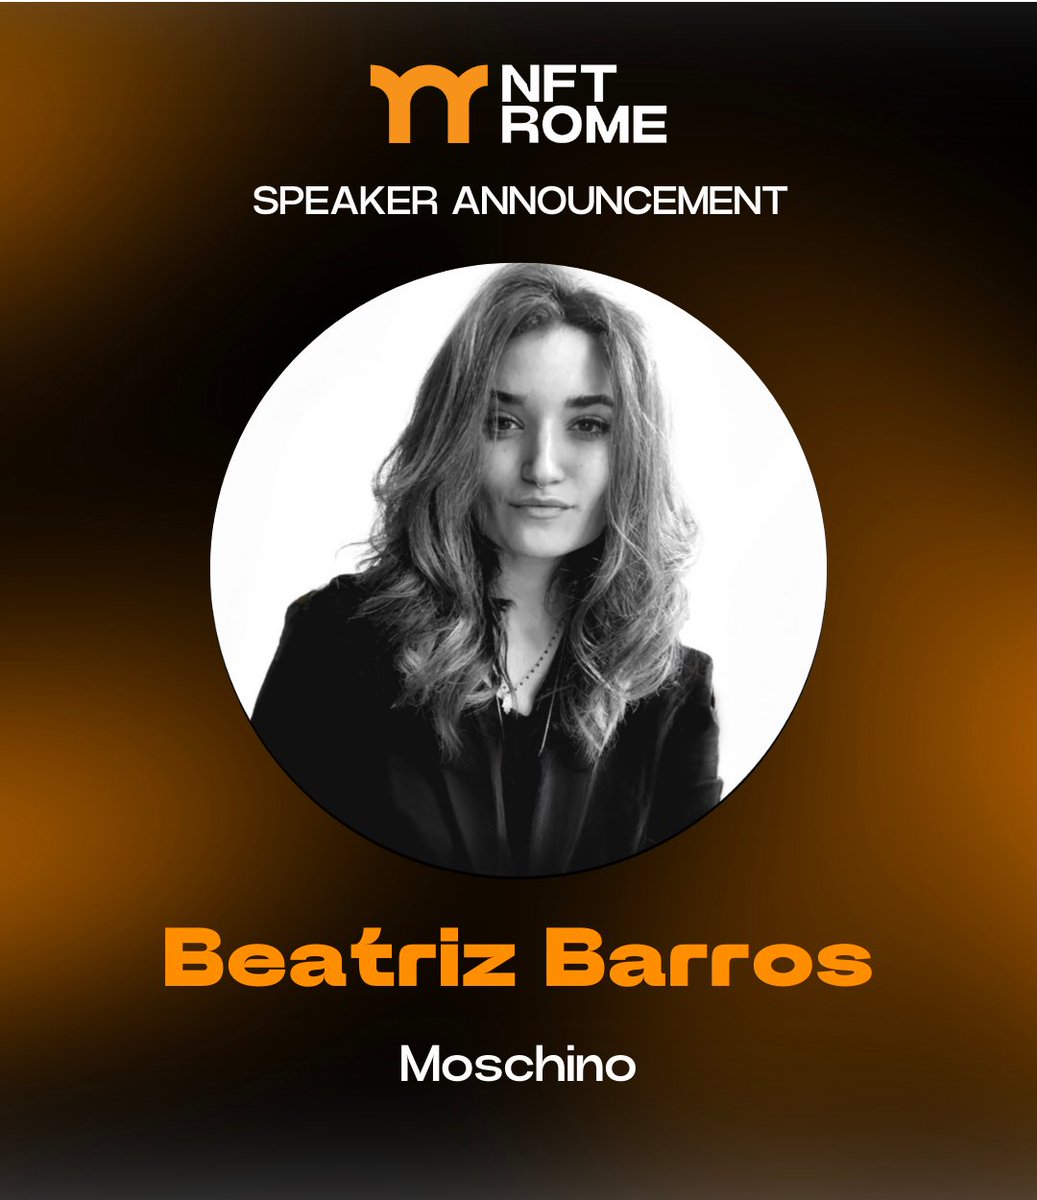 🚨Speaker Announcement 🚨 A warm welcome to Beatriz Barros from Moschino, as she will be speaking at NFT Rome about Fashion! 🇮🇹 She brings her expertise from top brands. Don't miss her panel to gain invaluable insights into the intersection of Fashion & Web3😍